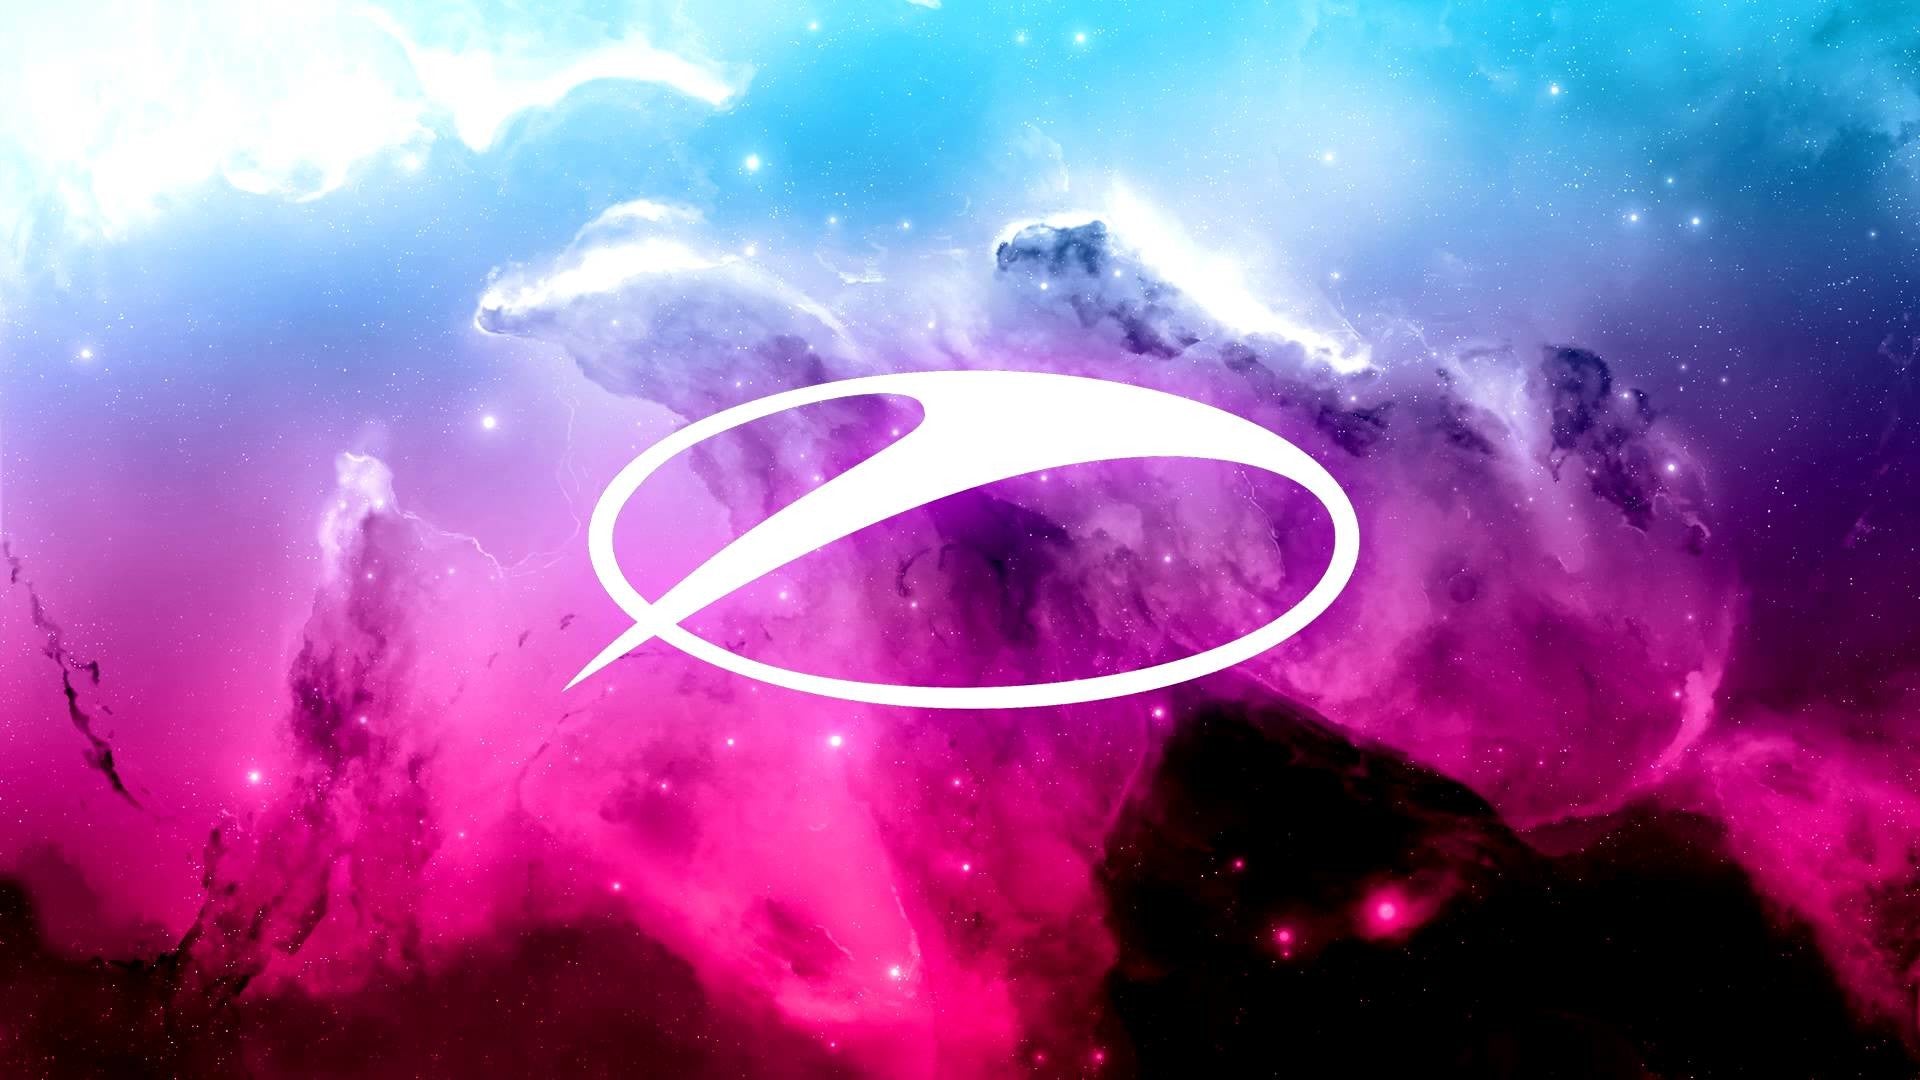 Complete Armin Van Buuren Yearly A State of Trance ASOT Shows DJ-Sets Compilation (2011)